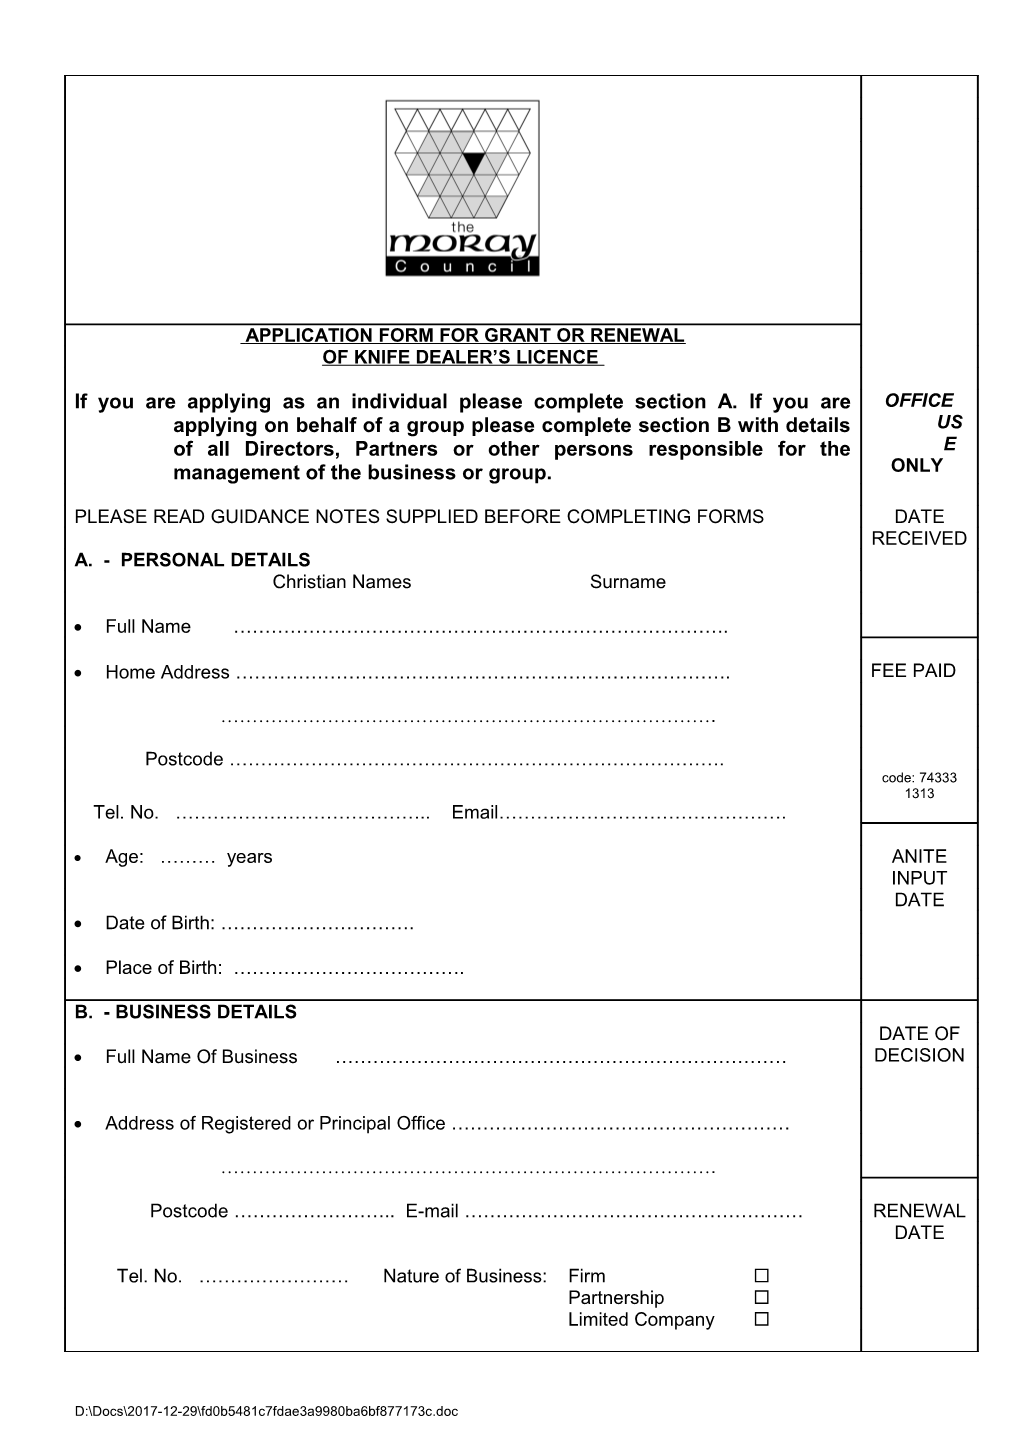 Application Form for Grant Or Renewal